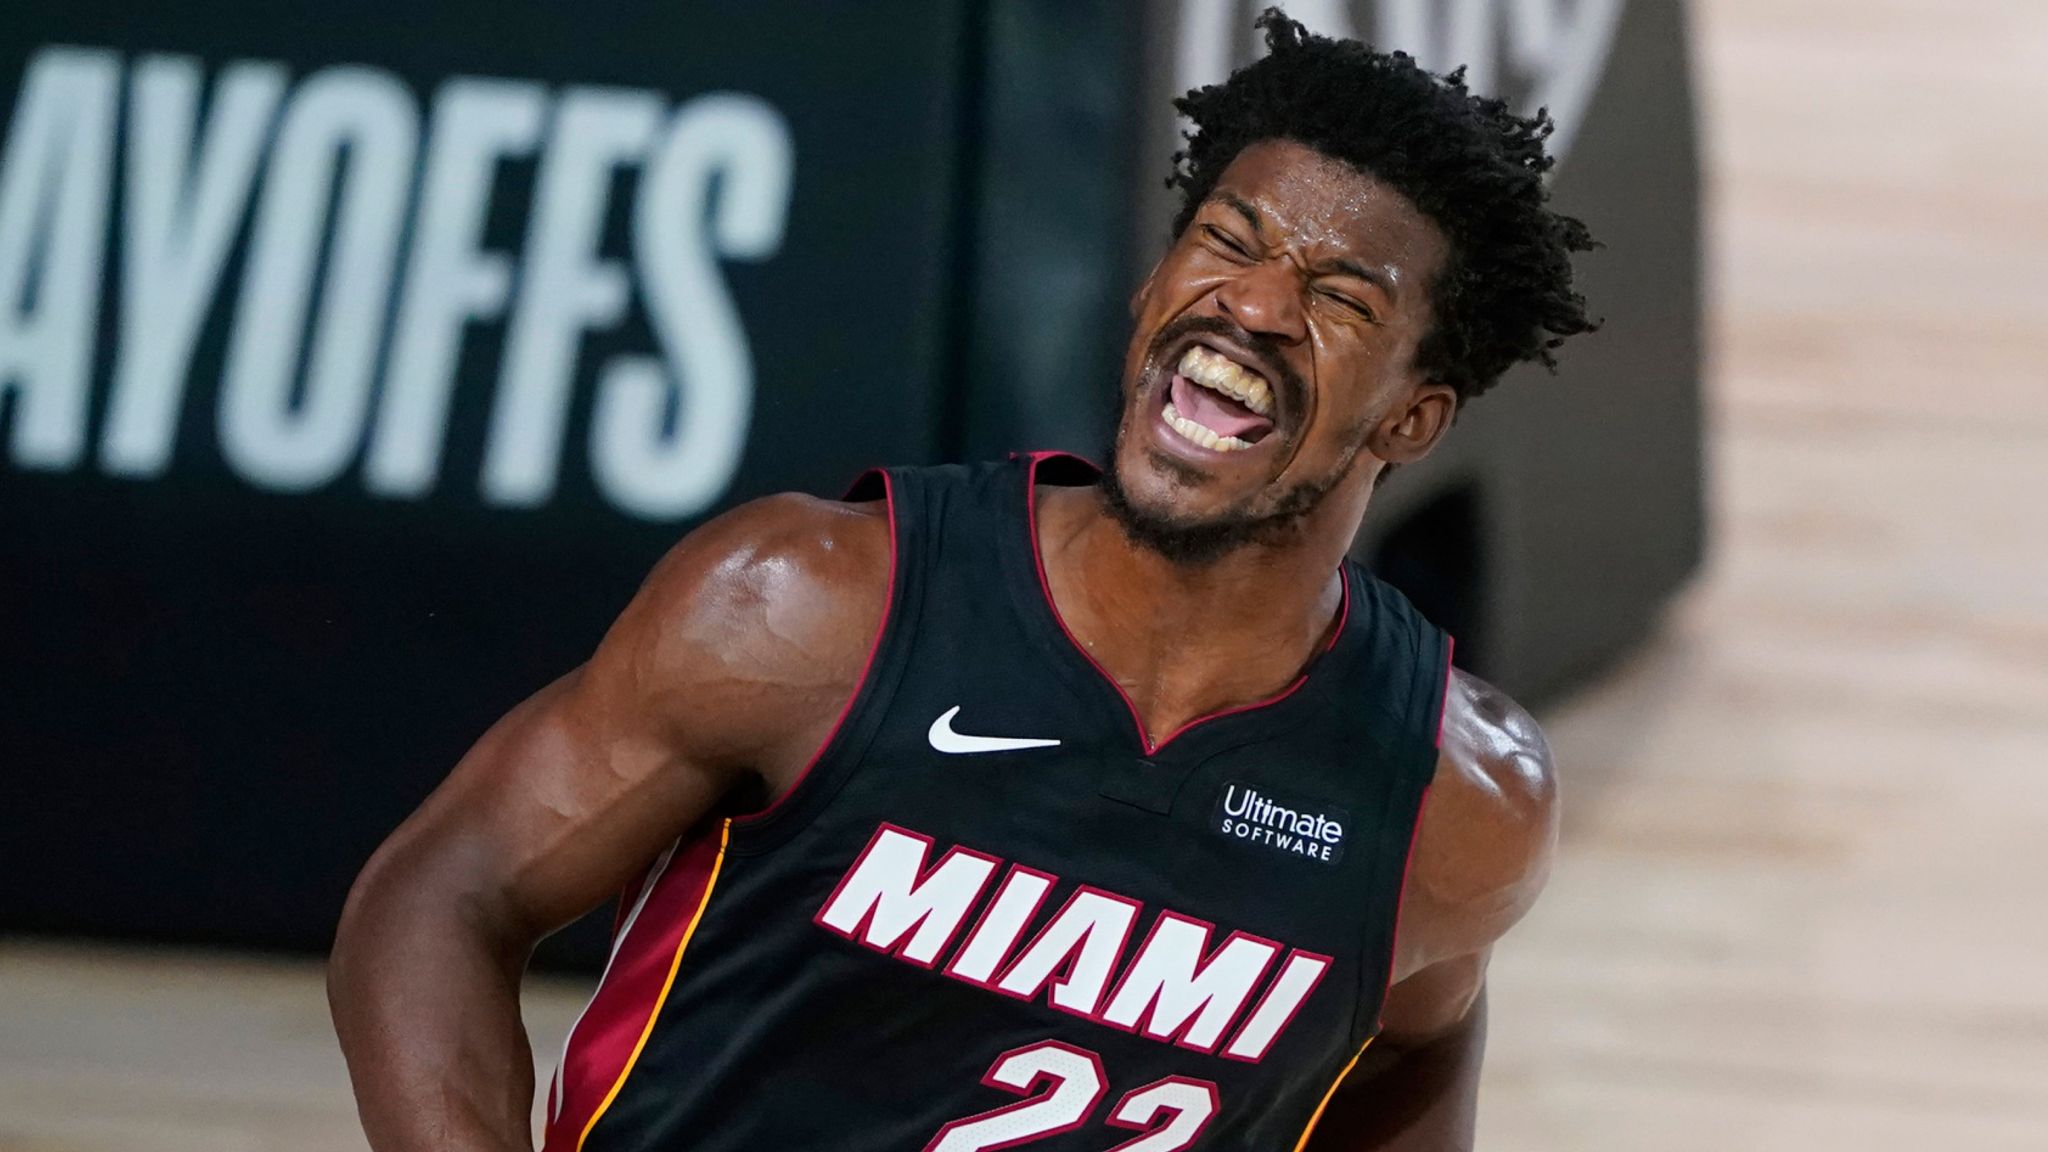 Jimmy Butler in hilarious media day prank, makes Miami Heat